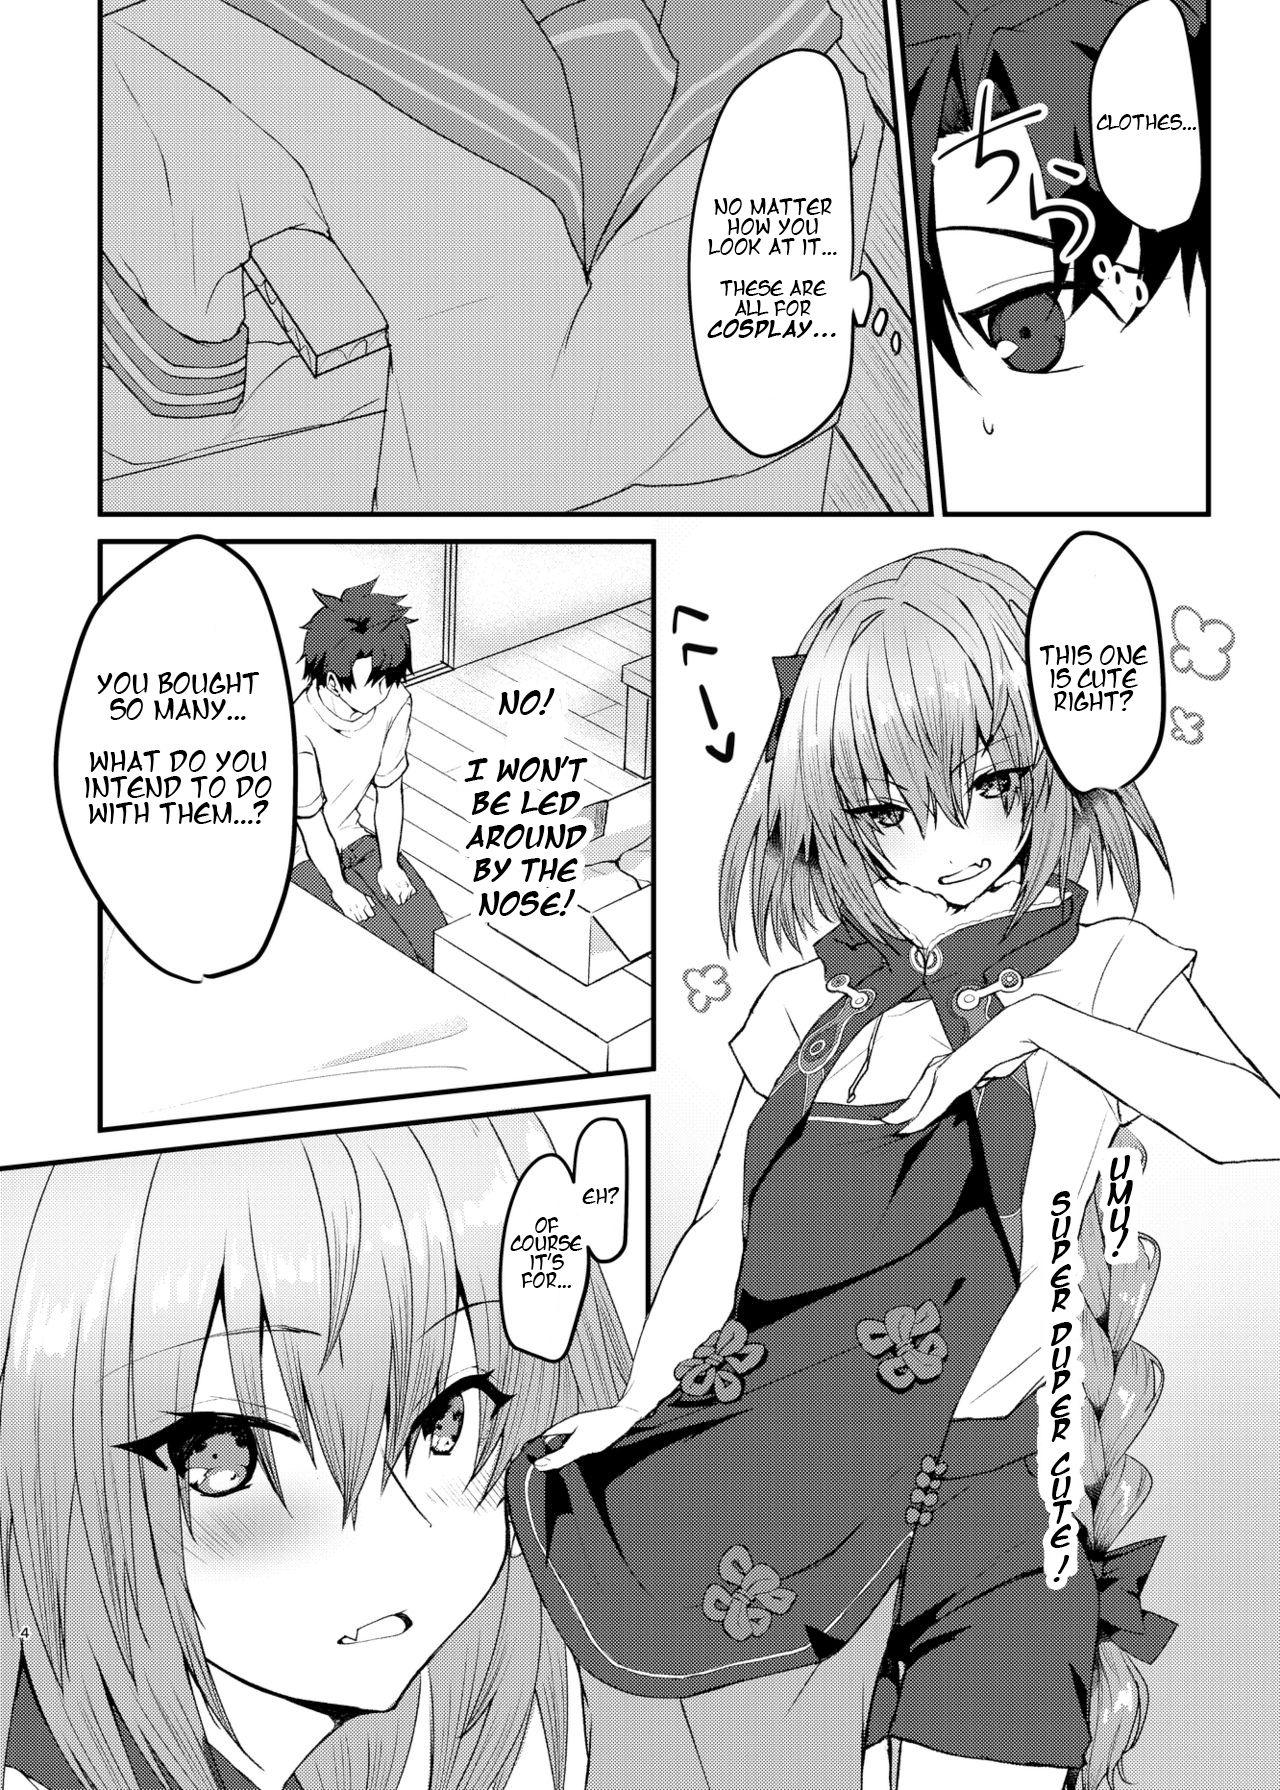 Throat Astolfo-kun to Cosplay H suru Hon | Cosplay H with Astolfo - Fate grand order Cop - Page 4